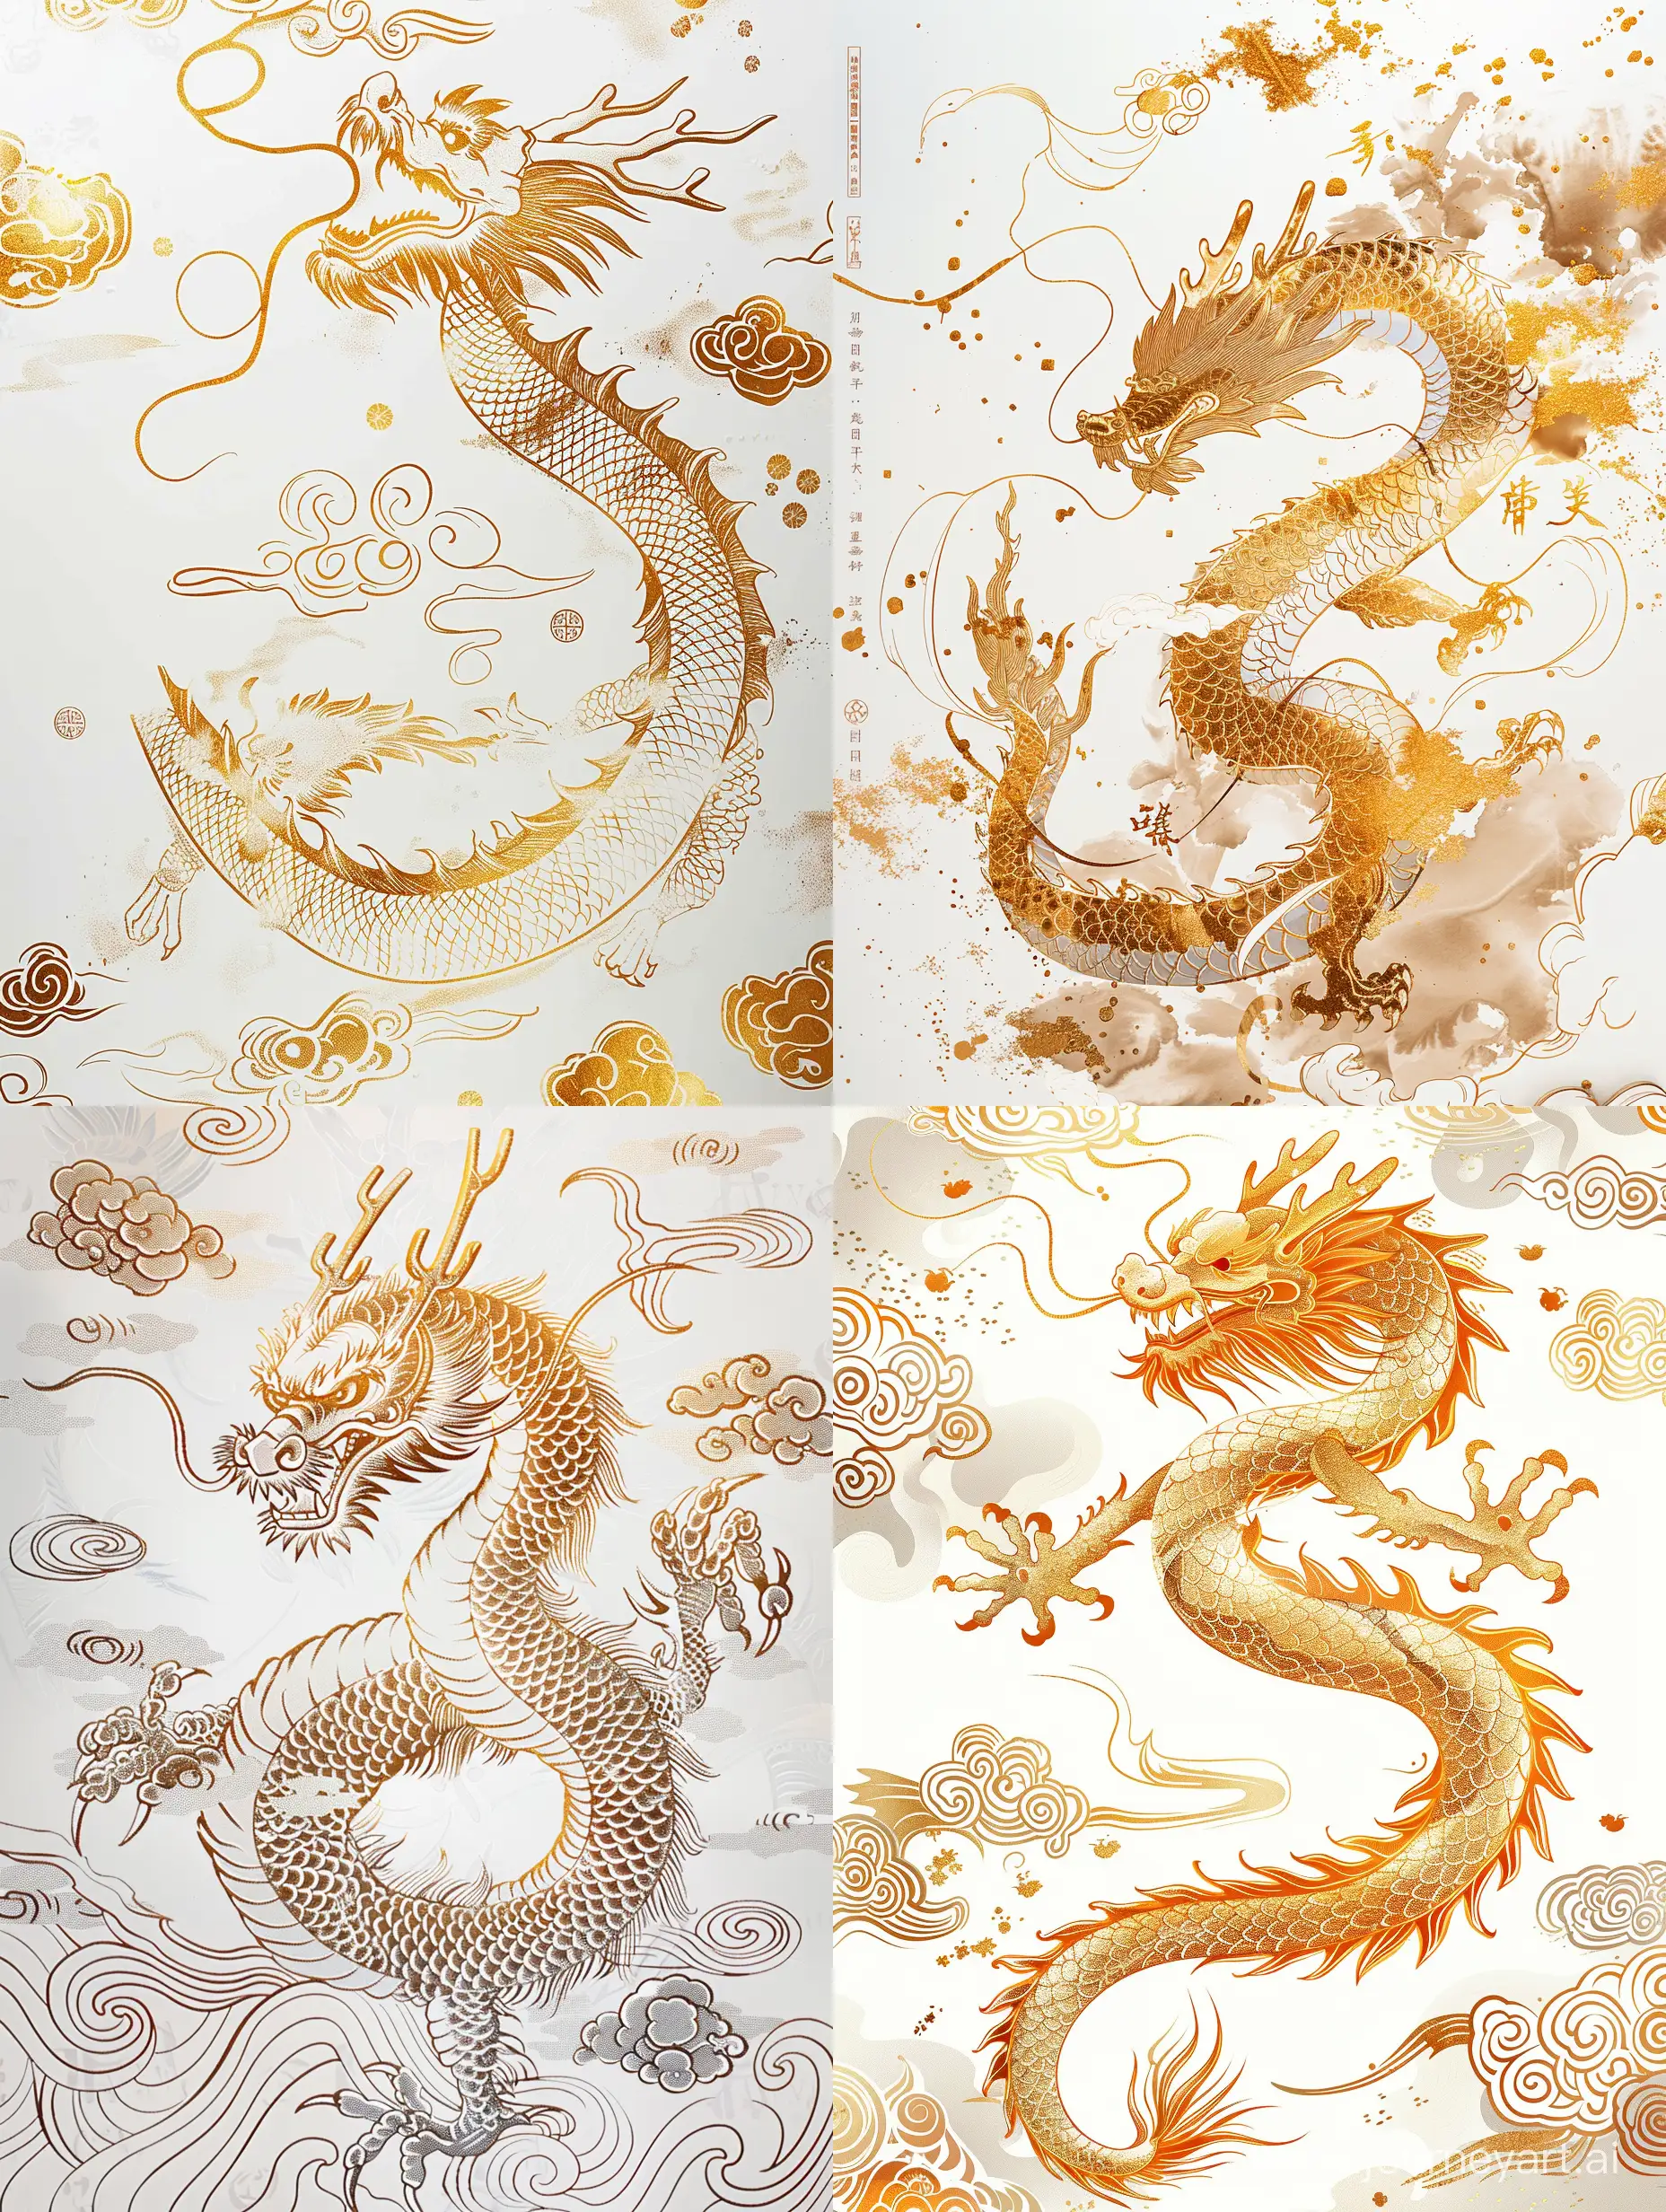 Golden-Chinese-Dragon-Amidst-Auspicious-Clouds-on-White-Background